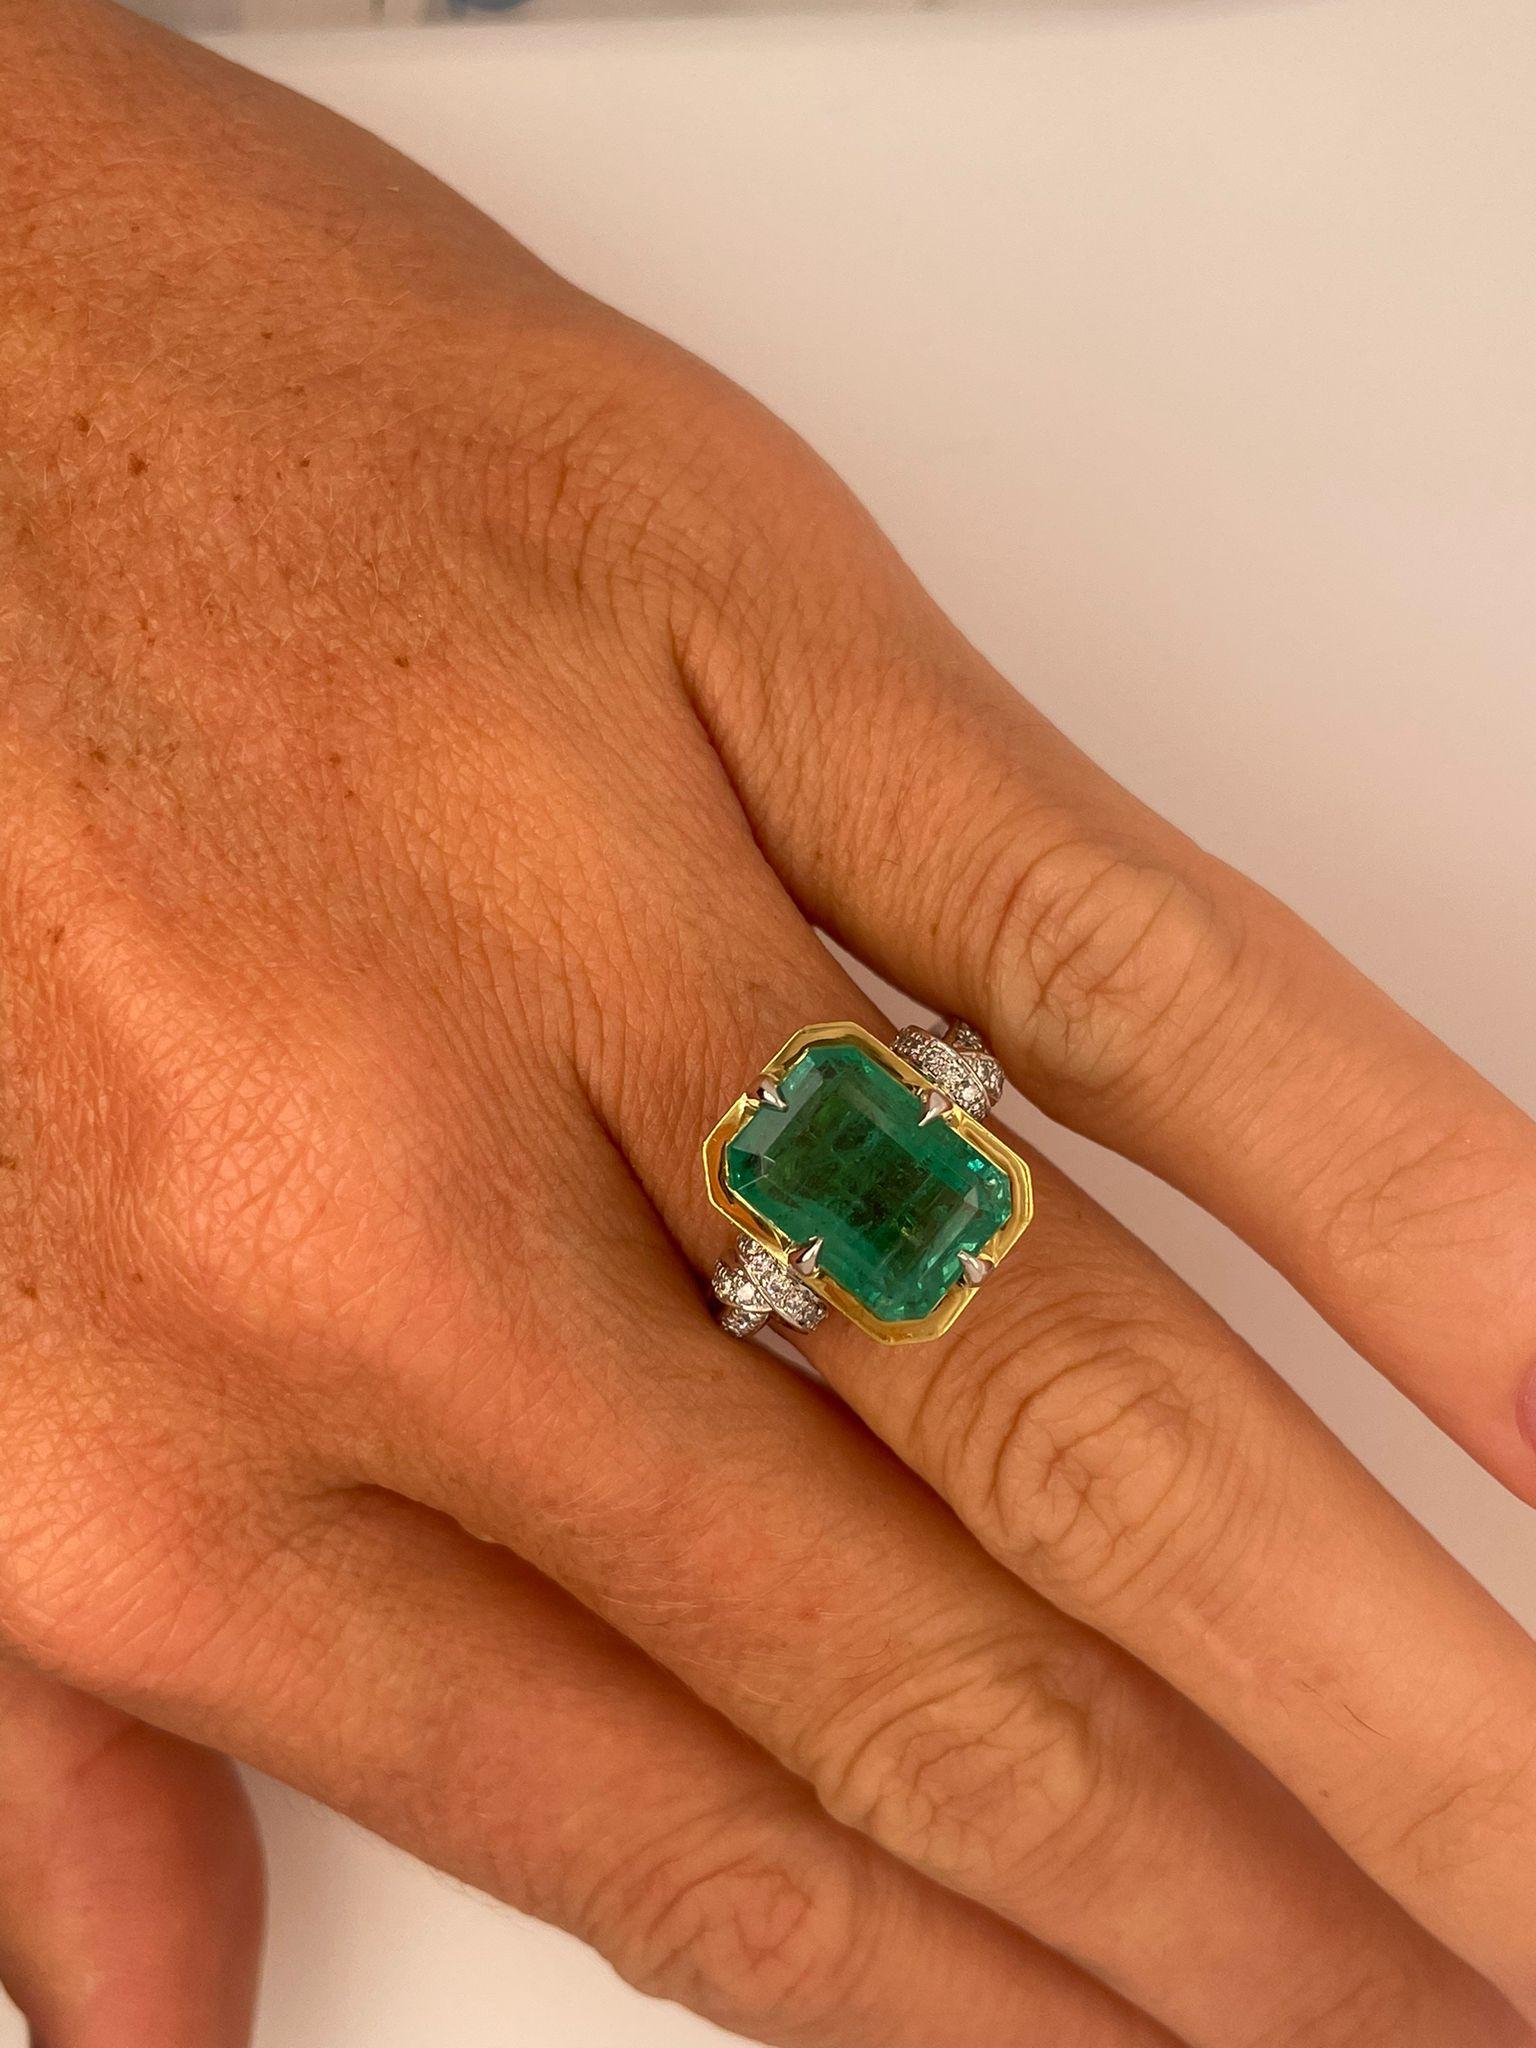 5.79 Carat Zambian Emerald in Forget Me Knot Style Ring with Diamonds 8